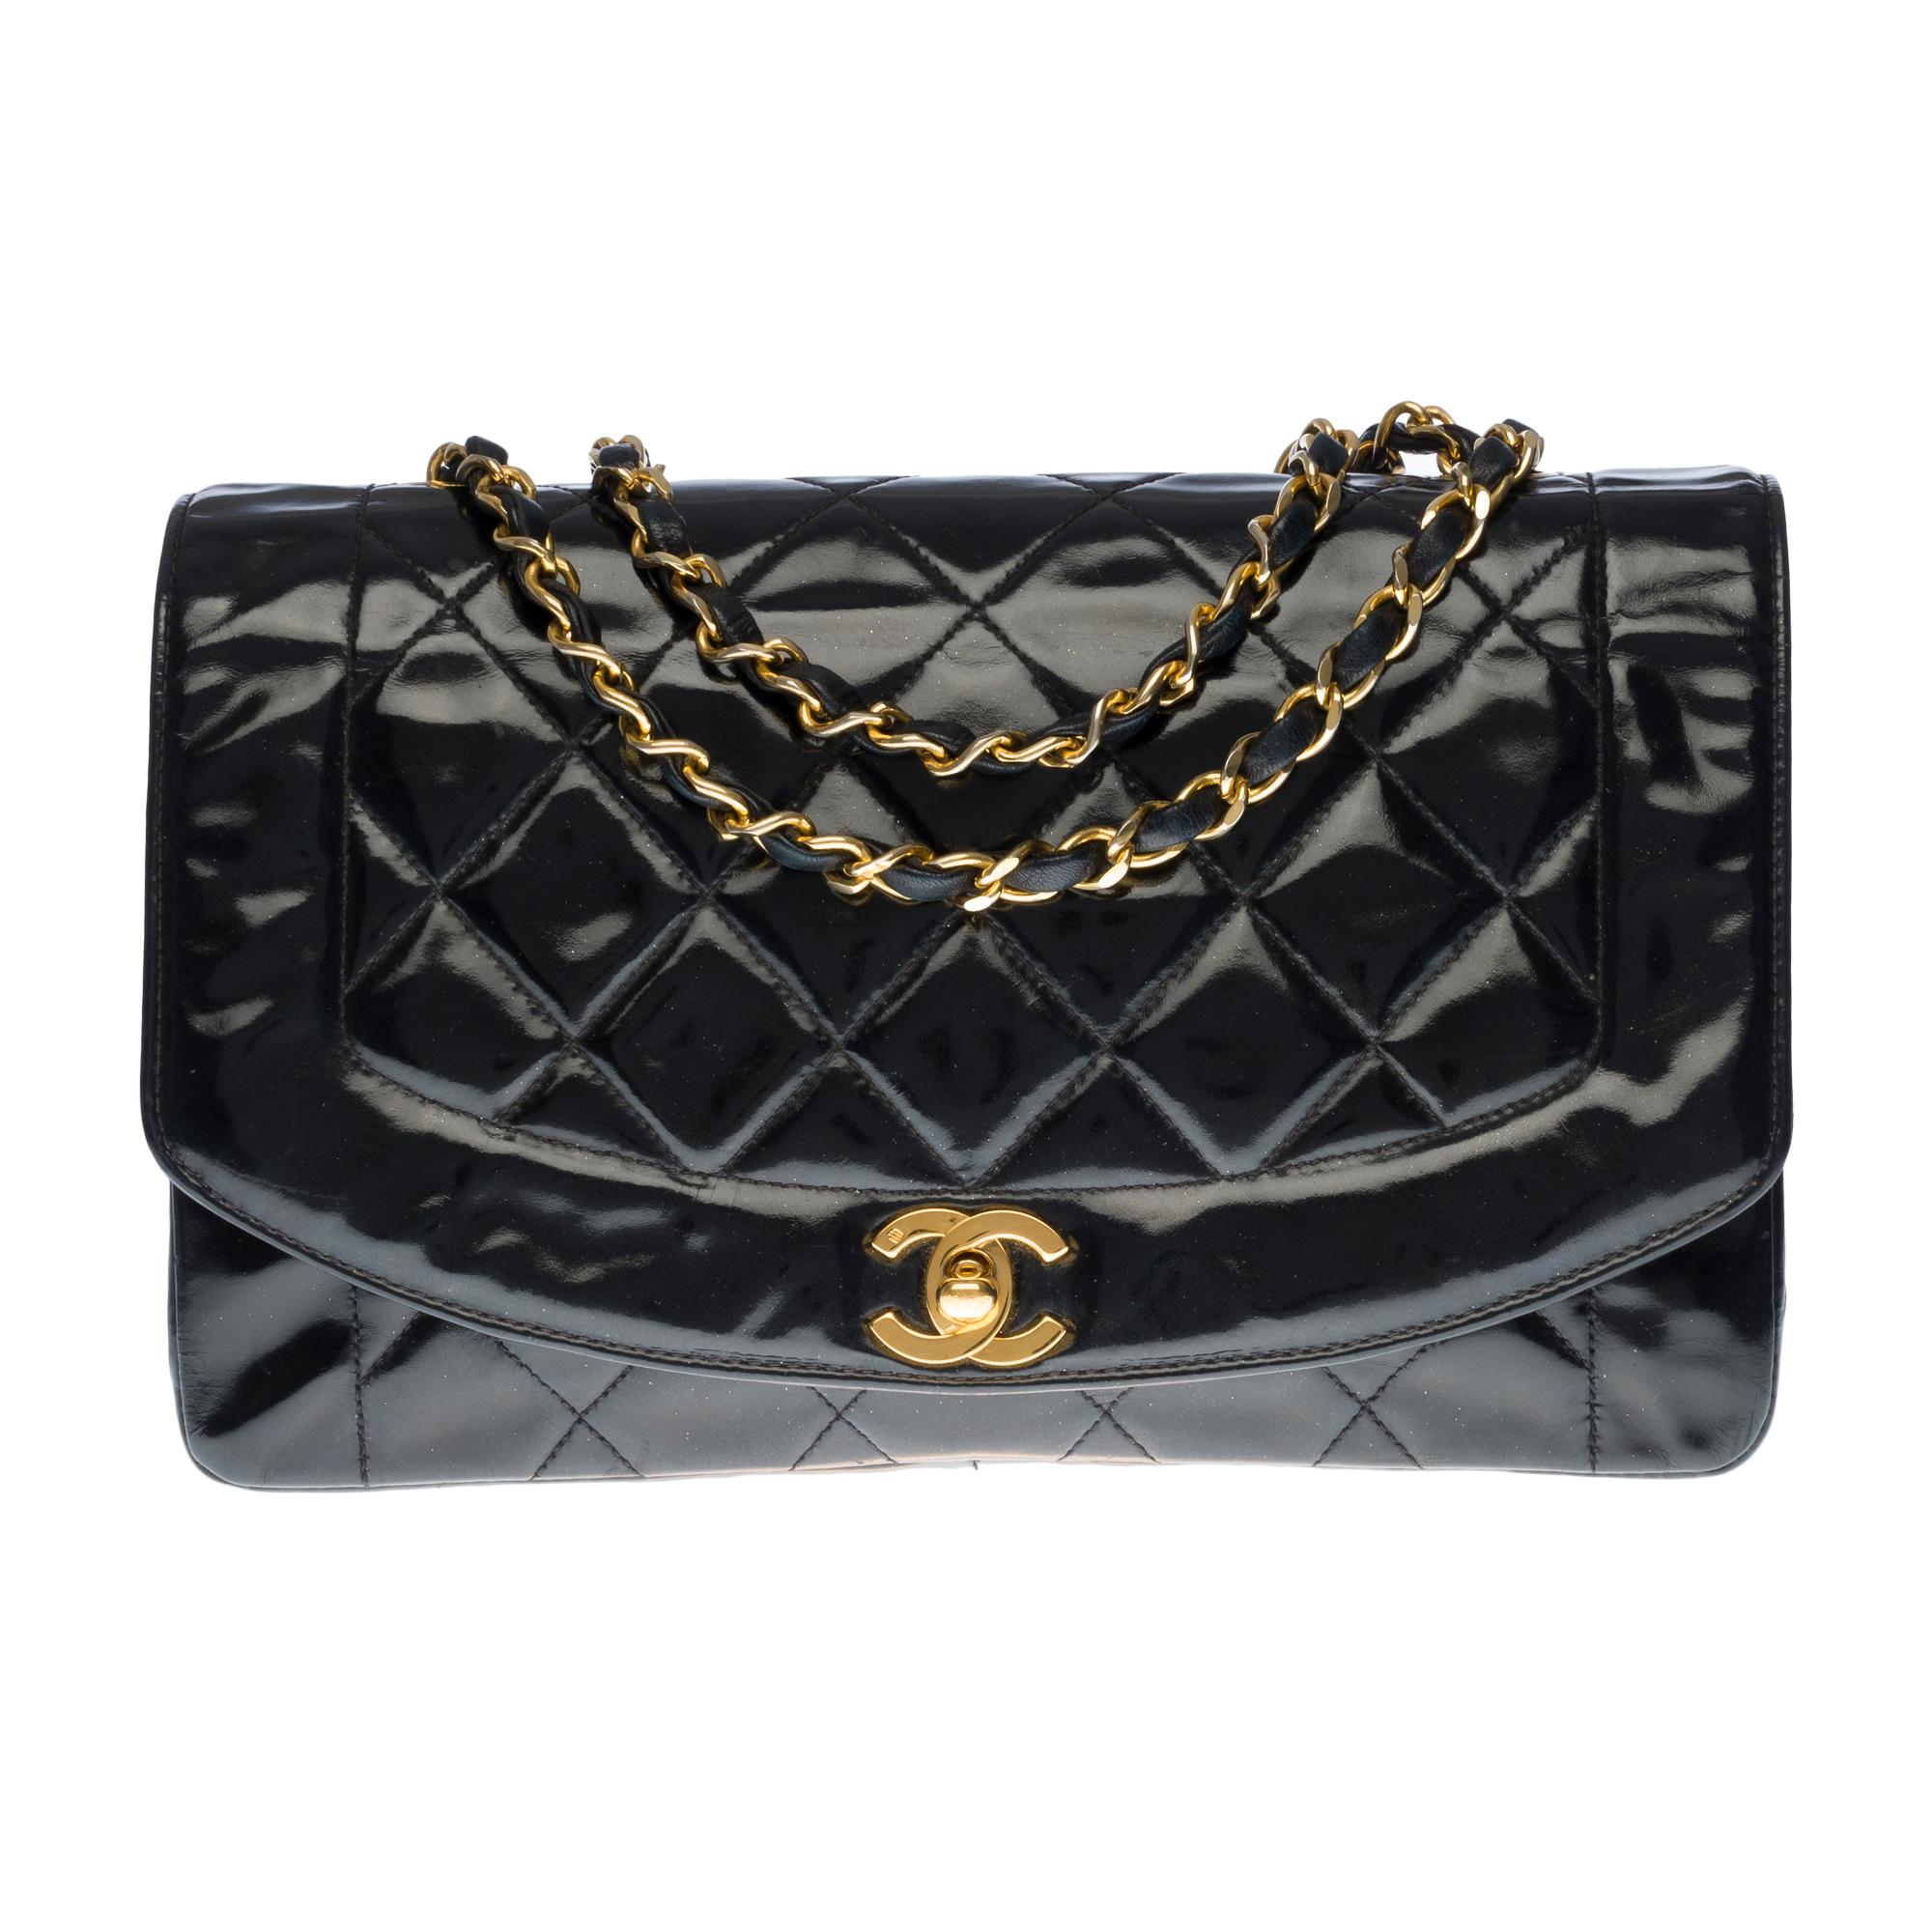 Chic Chanel Diana shoulder bag in black quilted patent leather, gold-tone metal hardware, a gold-tone metal chain handle intertwined with black leather allowing a shoulder or shoulder strap.

Gilded metal logo closure on flap.
Lining in black